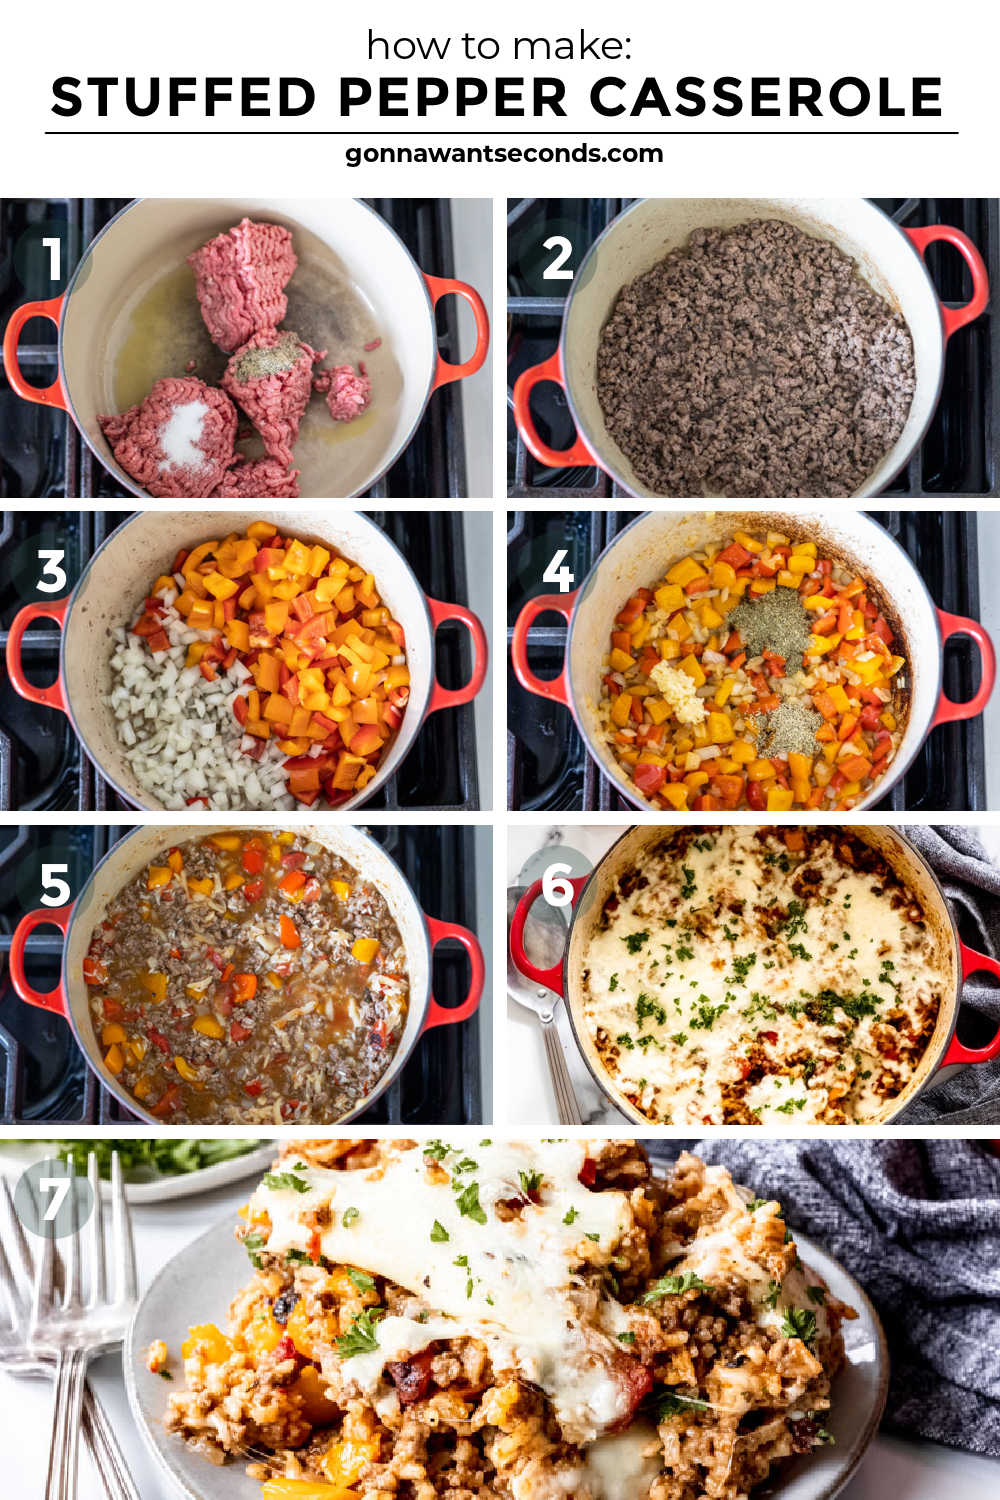 Step by step how to make stuffed pepper casserole